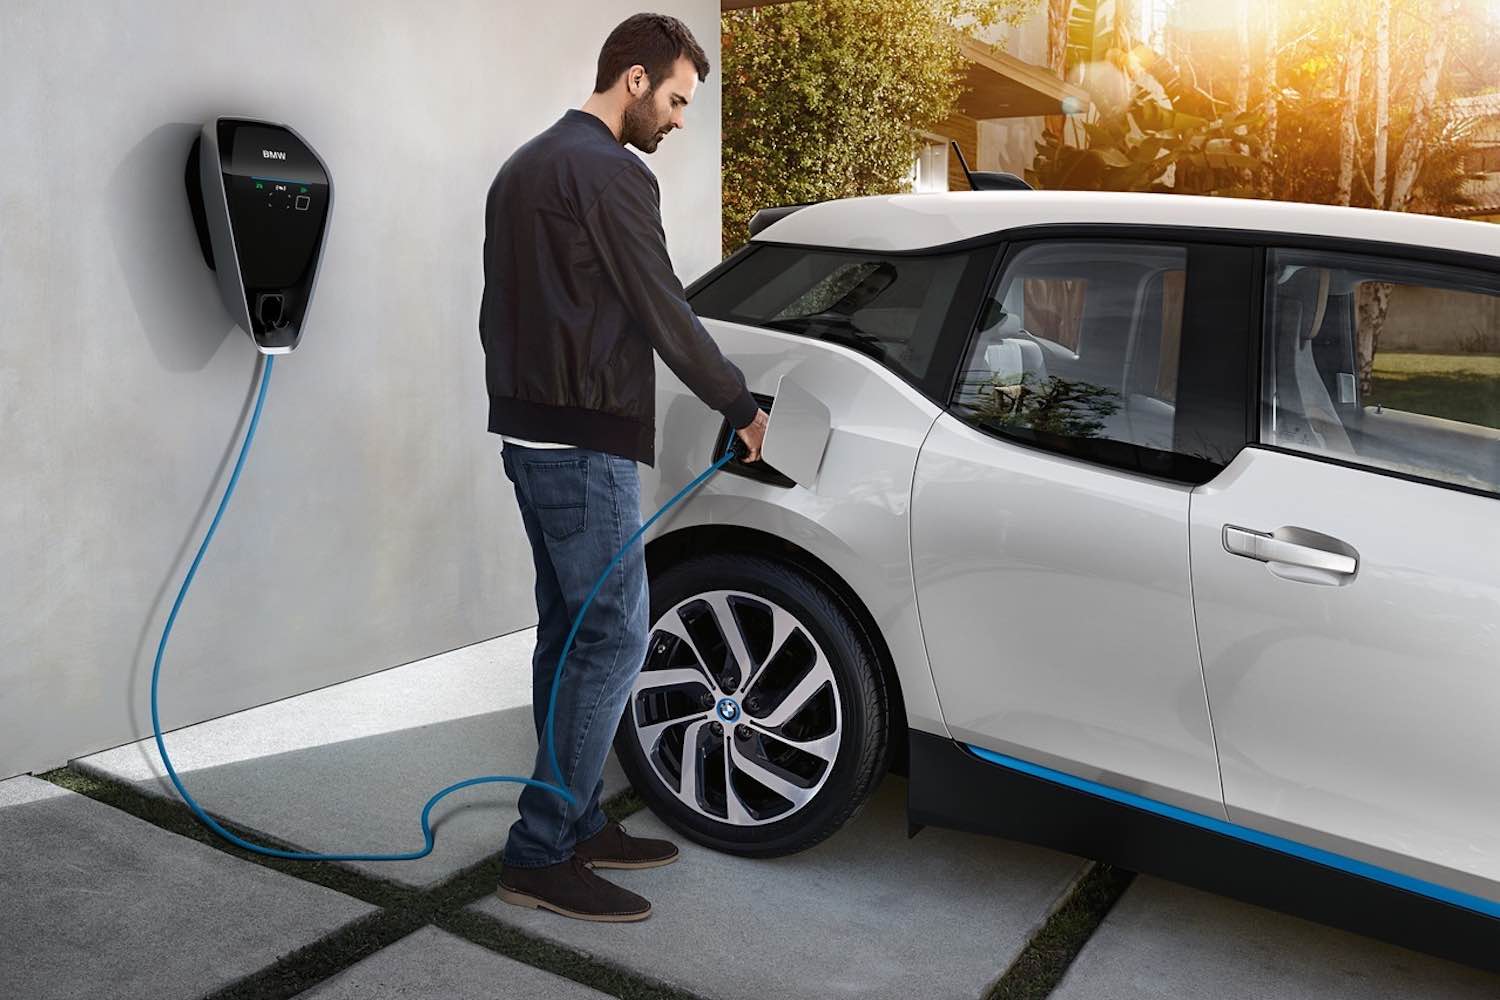 All households now qualify for EV charger grant